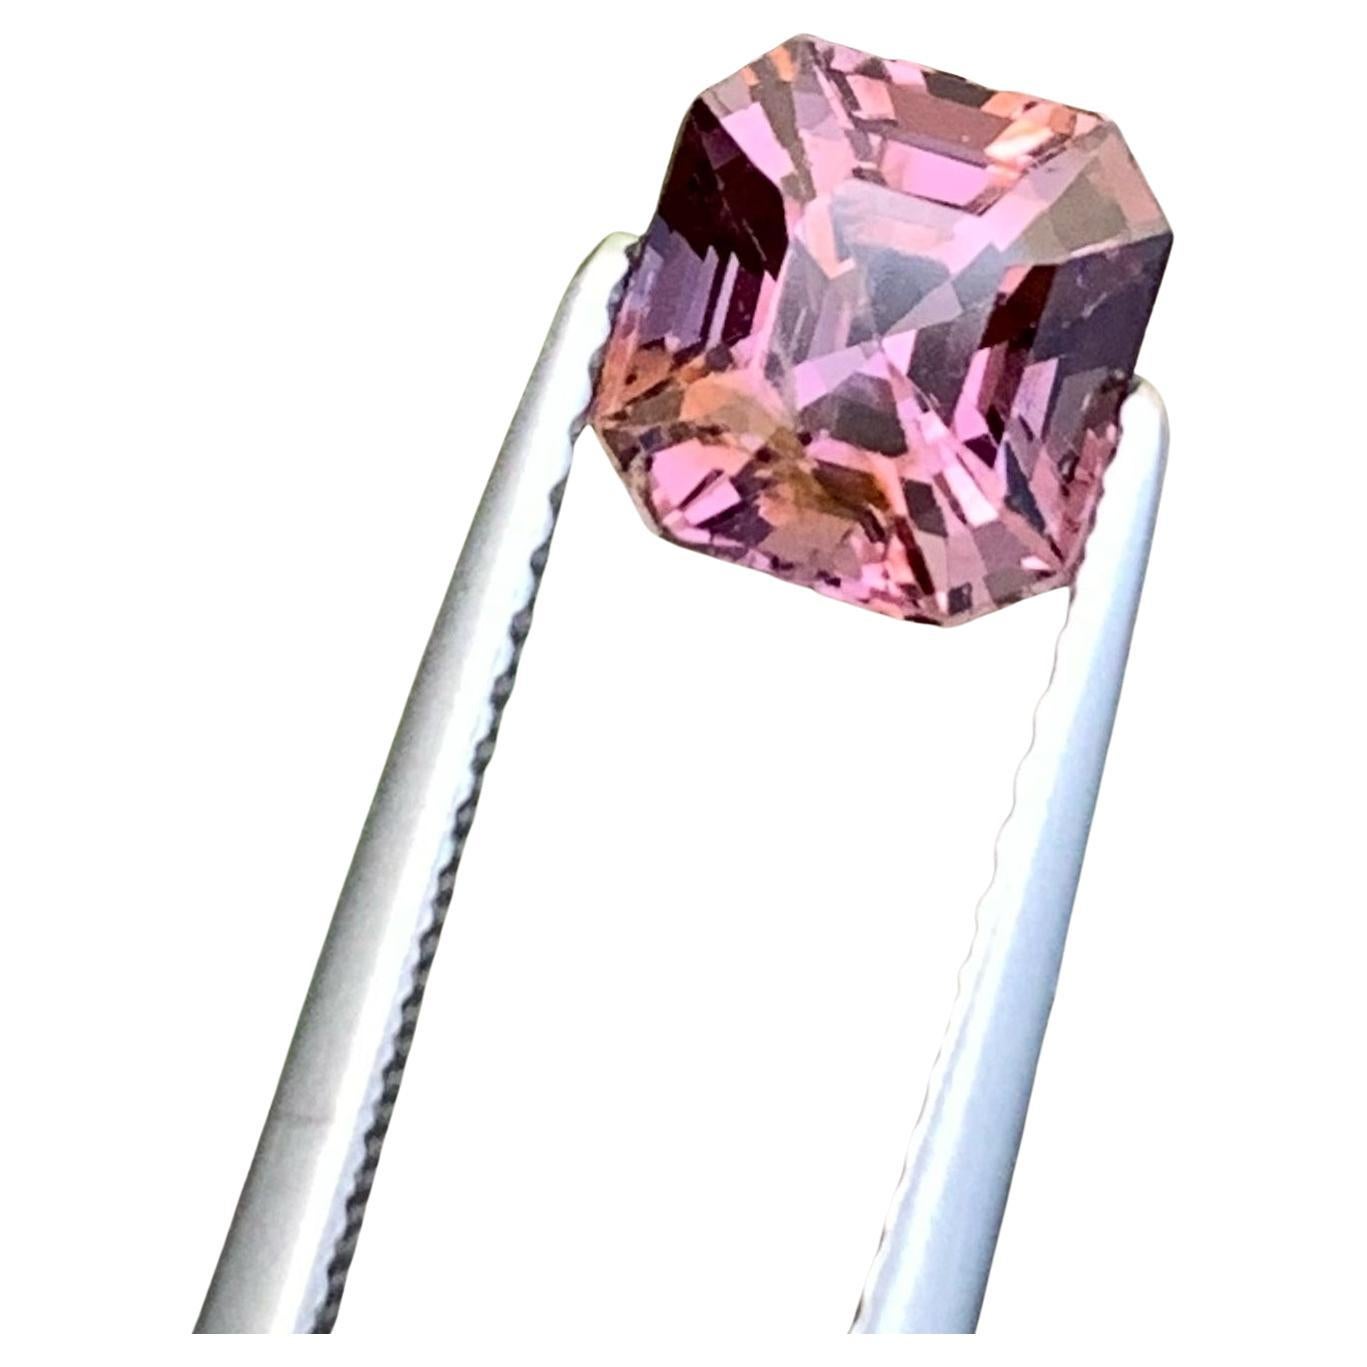 Stunning Natural Purplish Pink Spinel 1.75 CT Fancy Asscher Cut For Jewelry Size For Sale